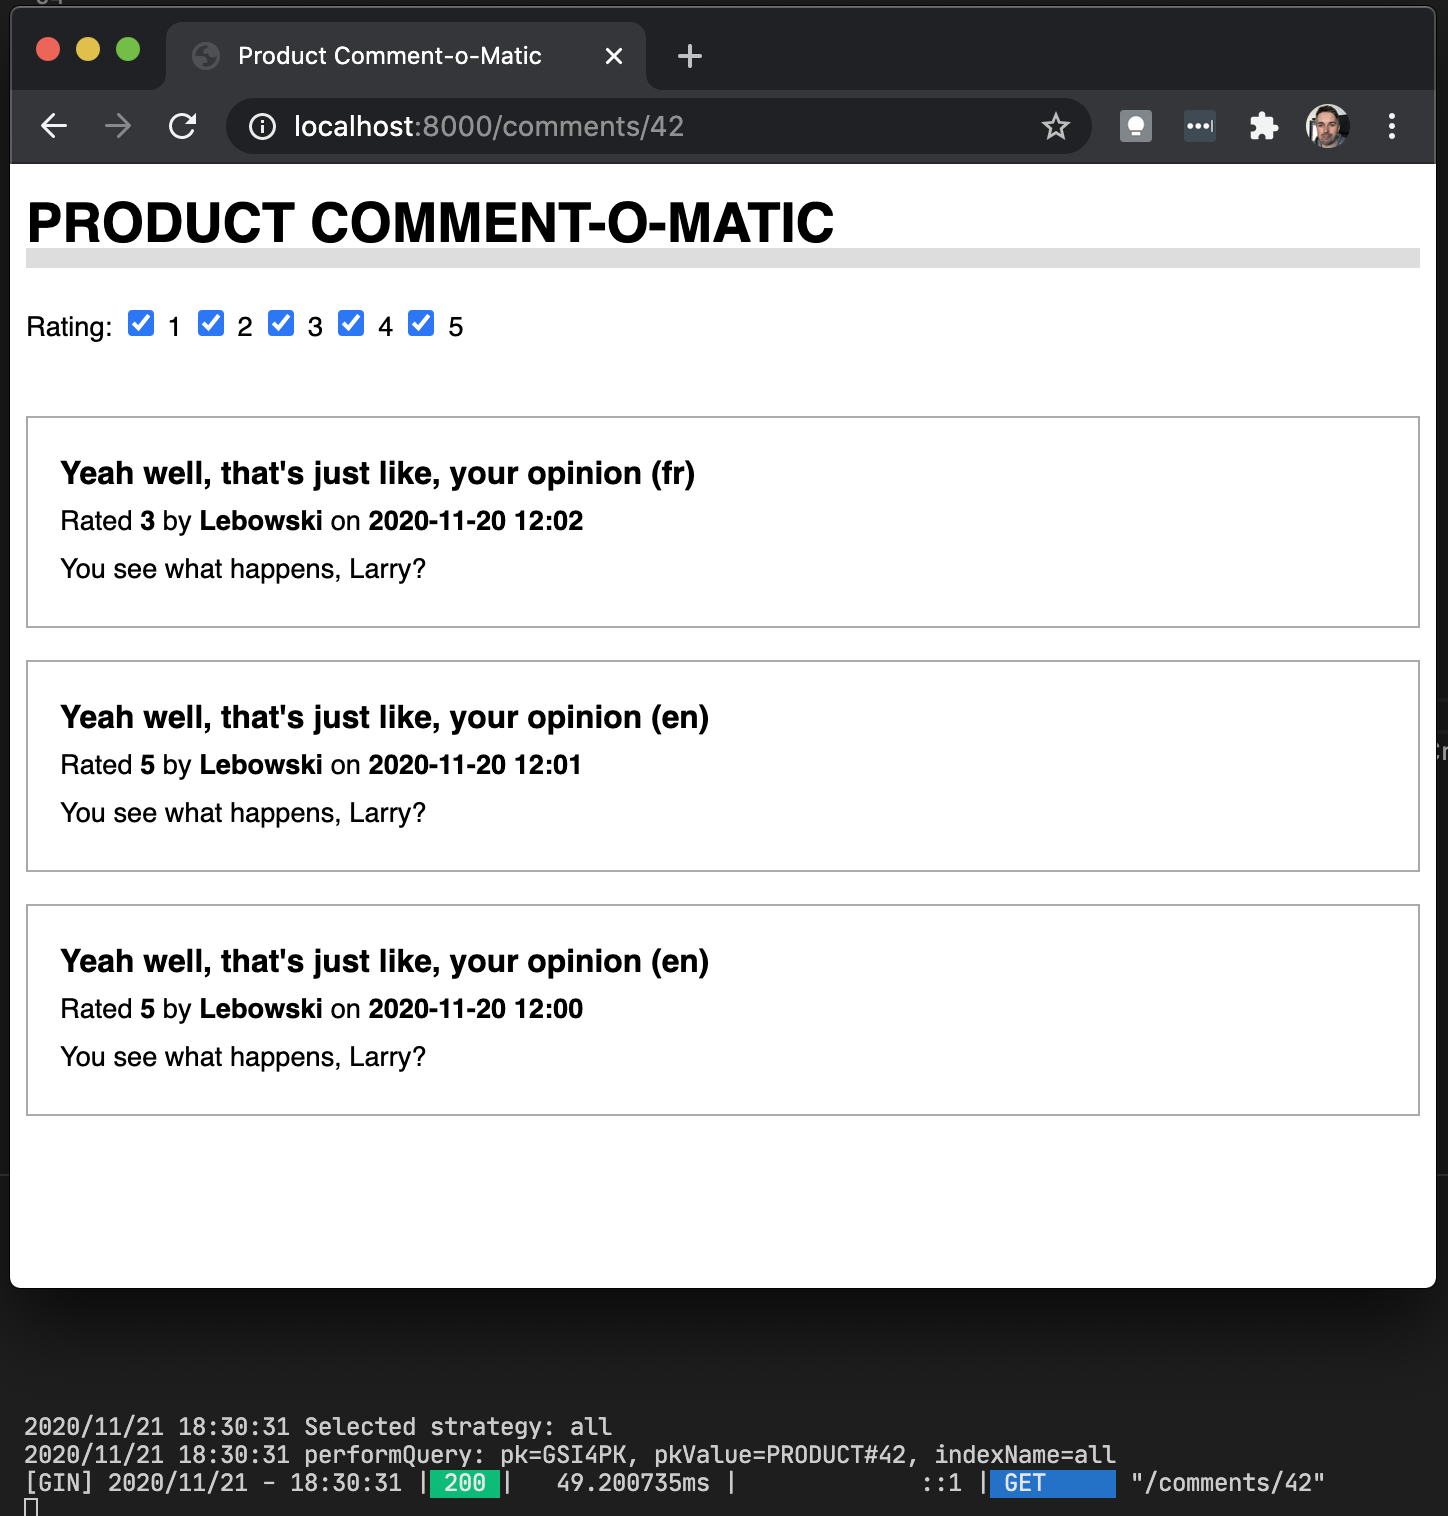 Product comments UI: all ratings, all languages